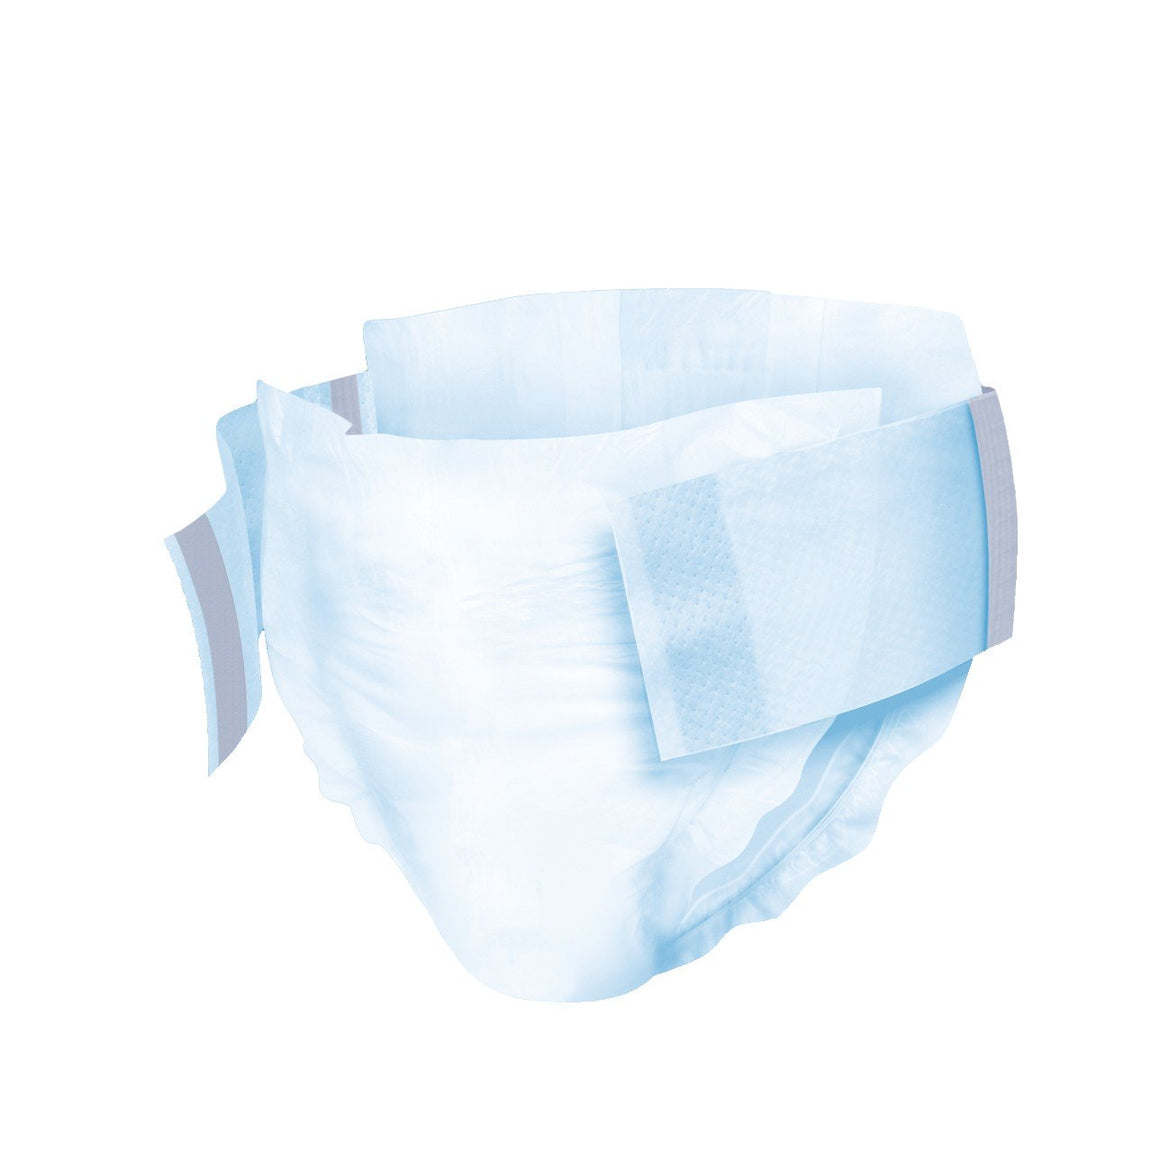 TENA Absorbent Stretch Plus Disposable Adult Incontinent Brief Tab Closure